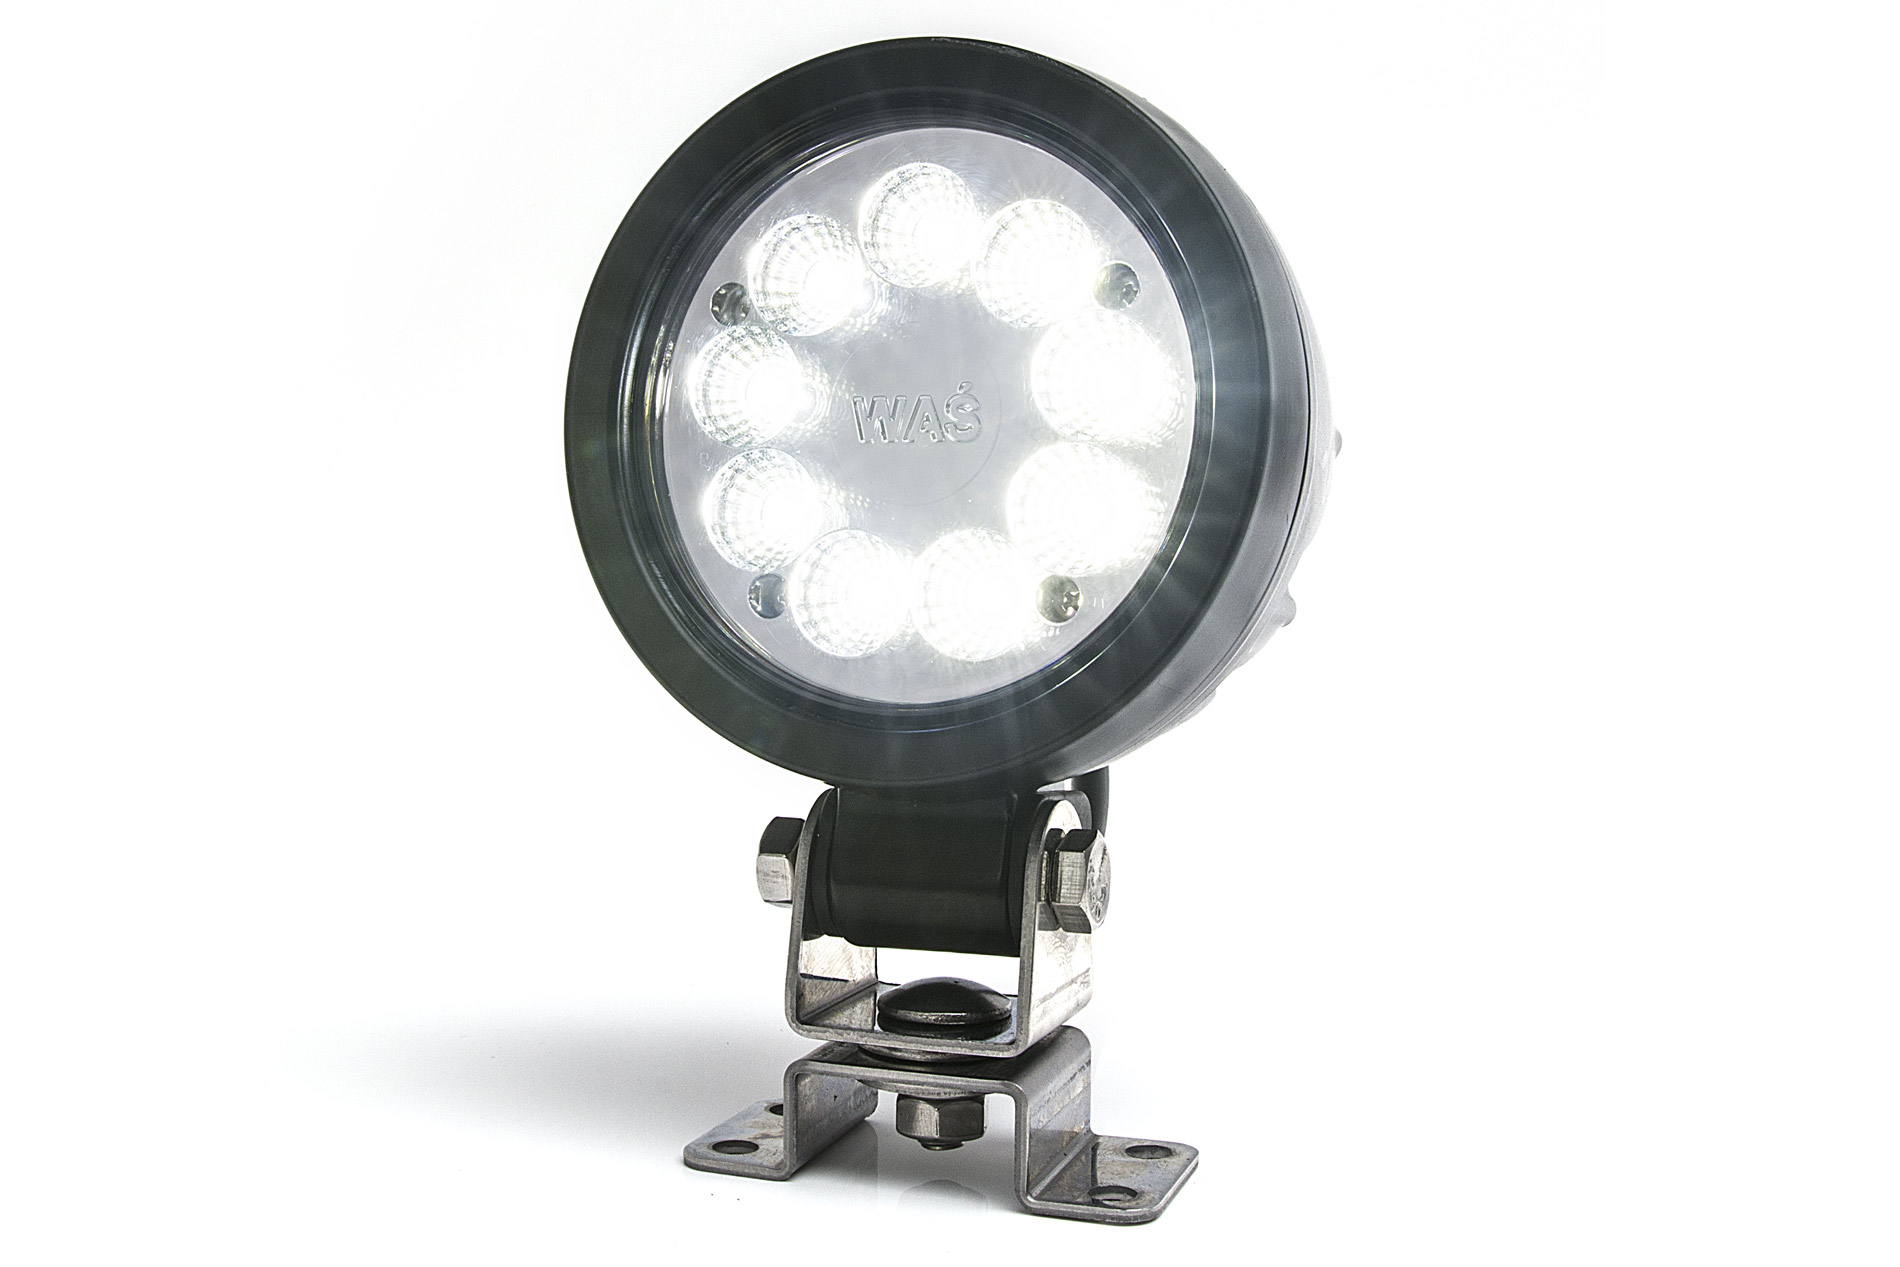 Work lamps - W162 5000